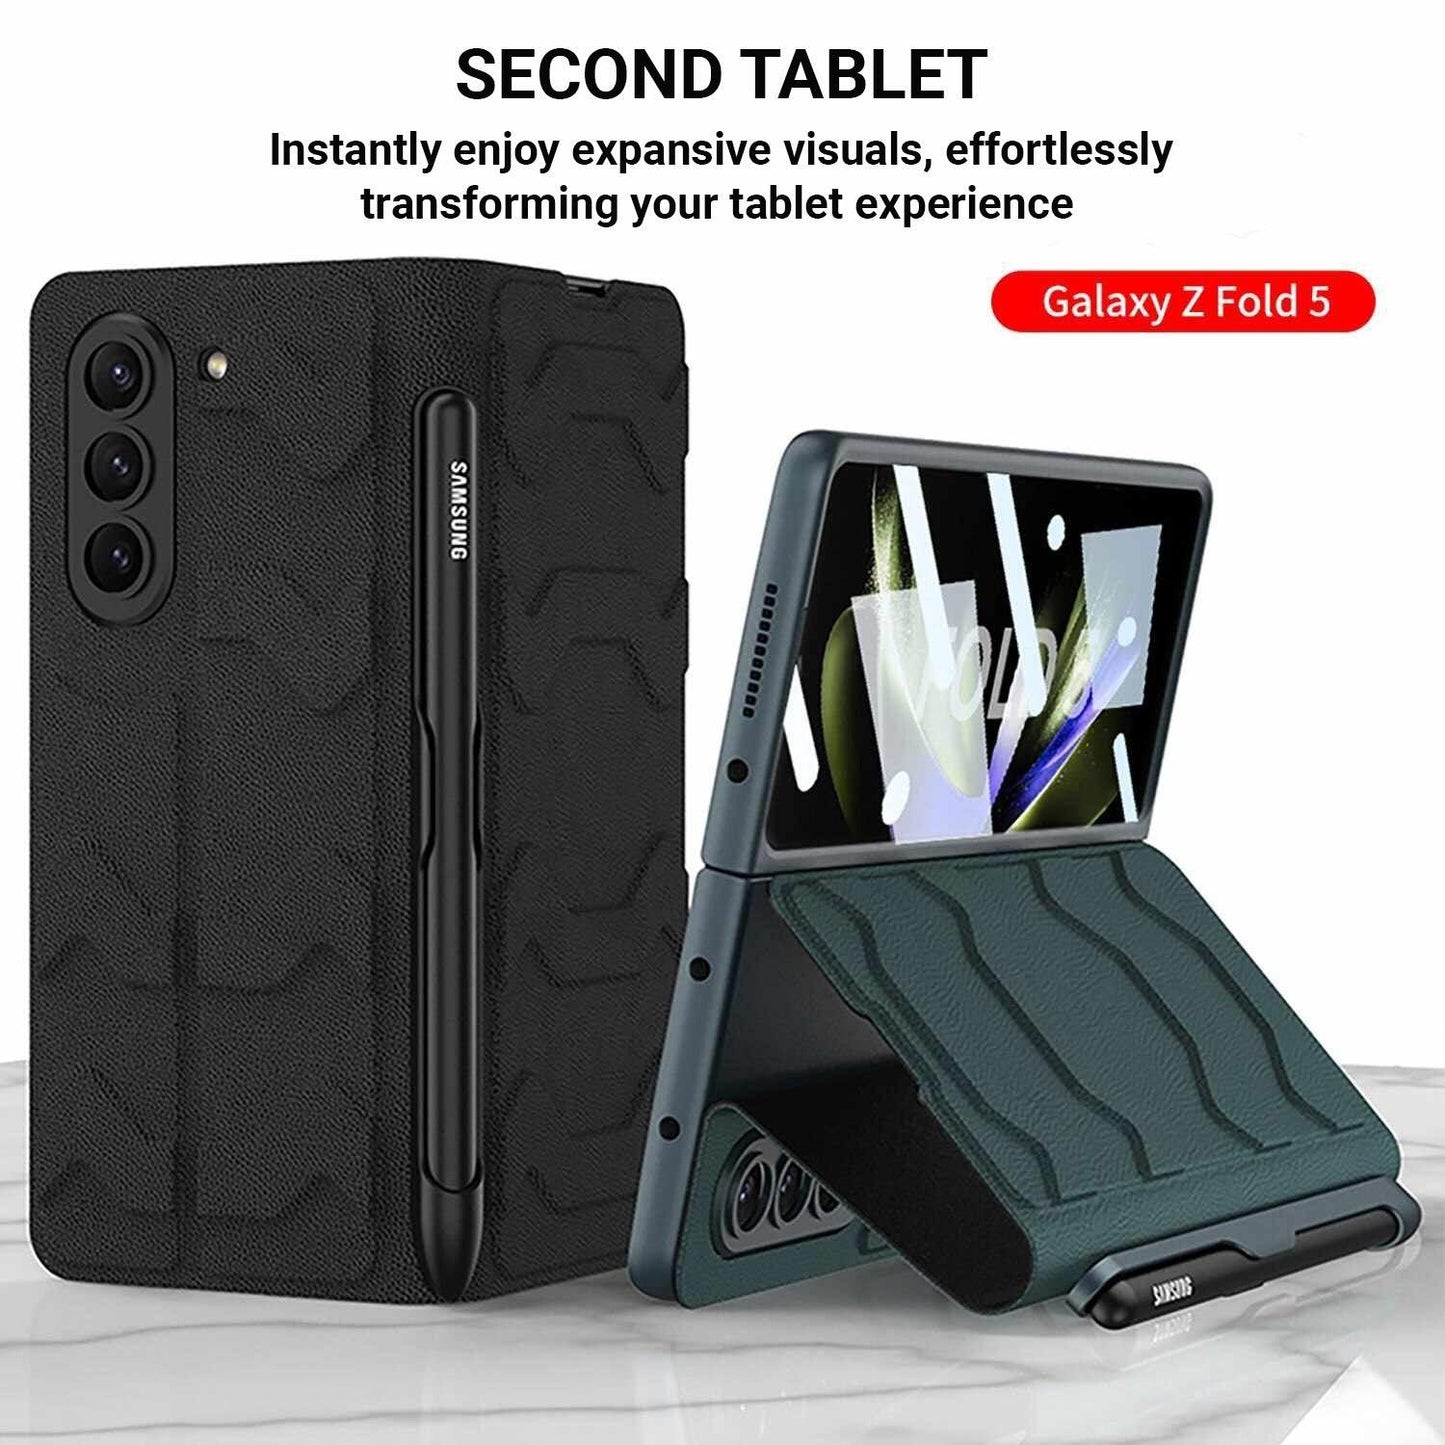 Tauri Leather Case for Galaxy Z Fold With Side Pen Slot - Astra Cases SG